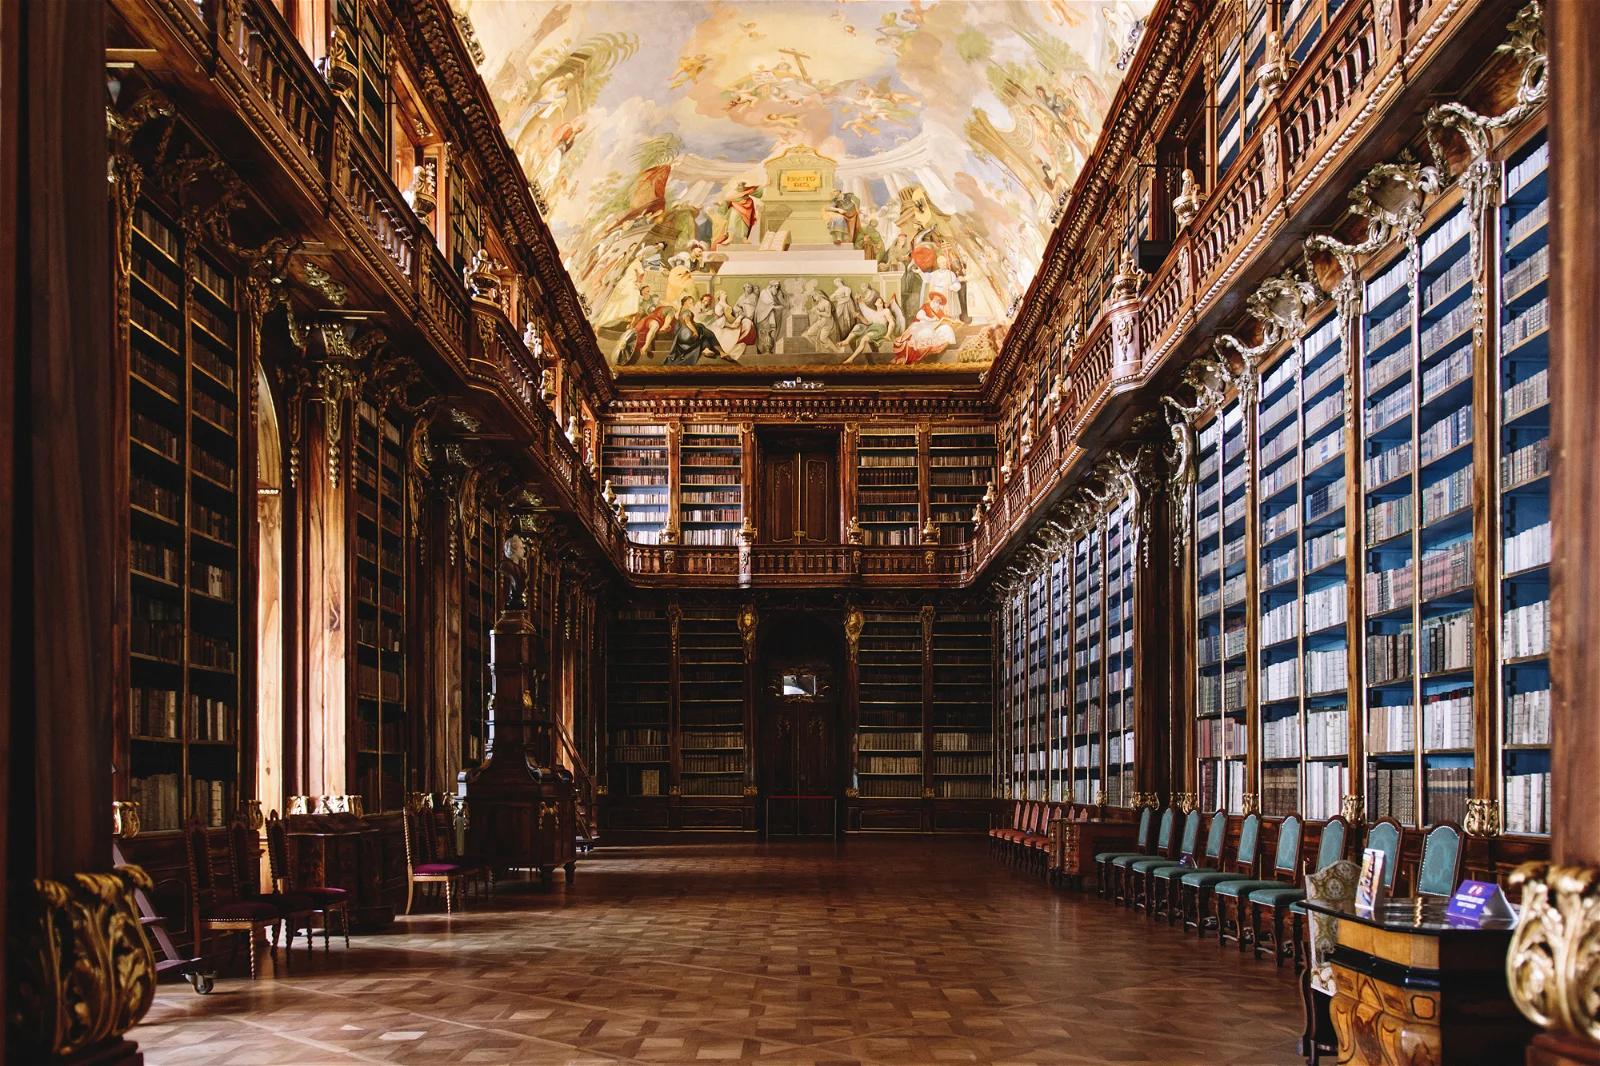 An elegant old library room with a high, painted ceiling and wall-to-wall bookshelves filled with blue-bound books, reflecting a classical European architecture.
